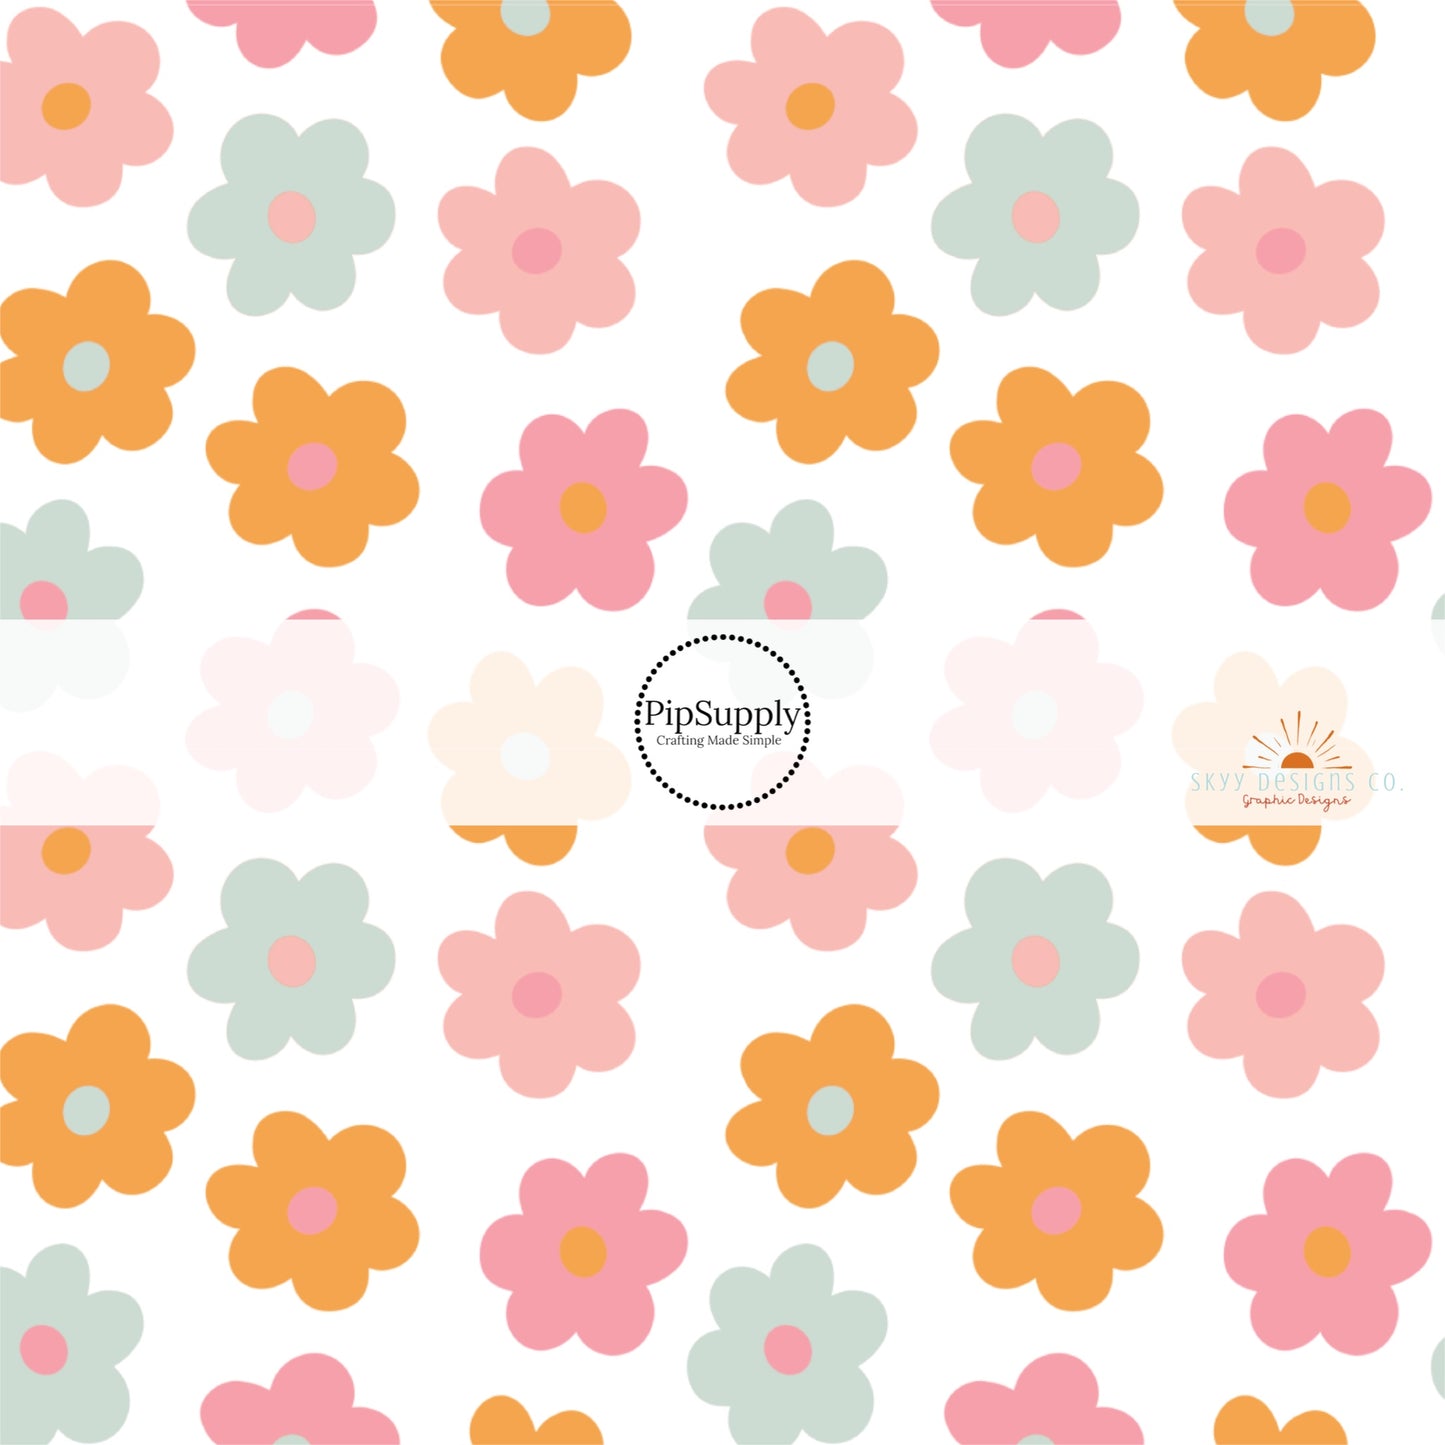 Orange, pink, and blue flowers with multi centers on white bow strips